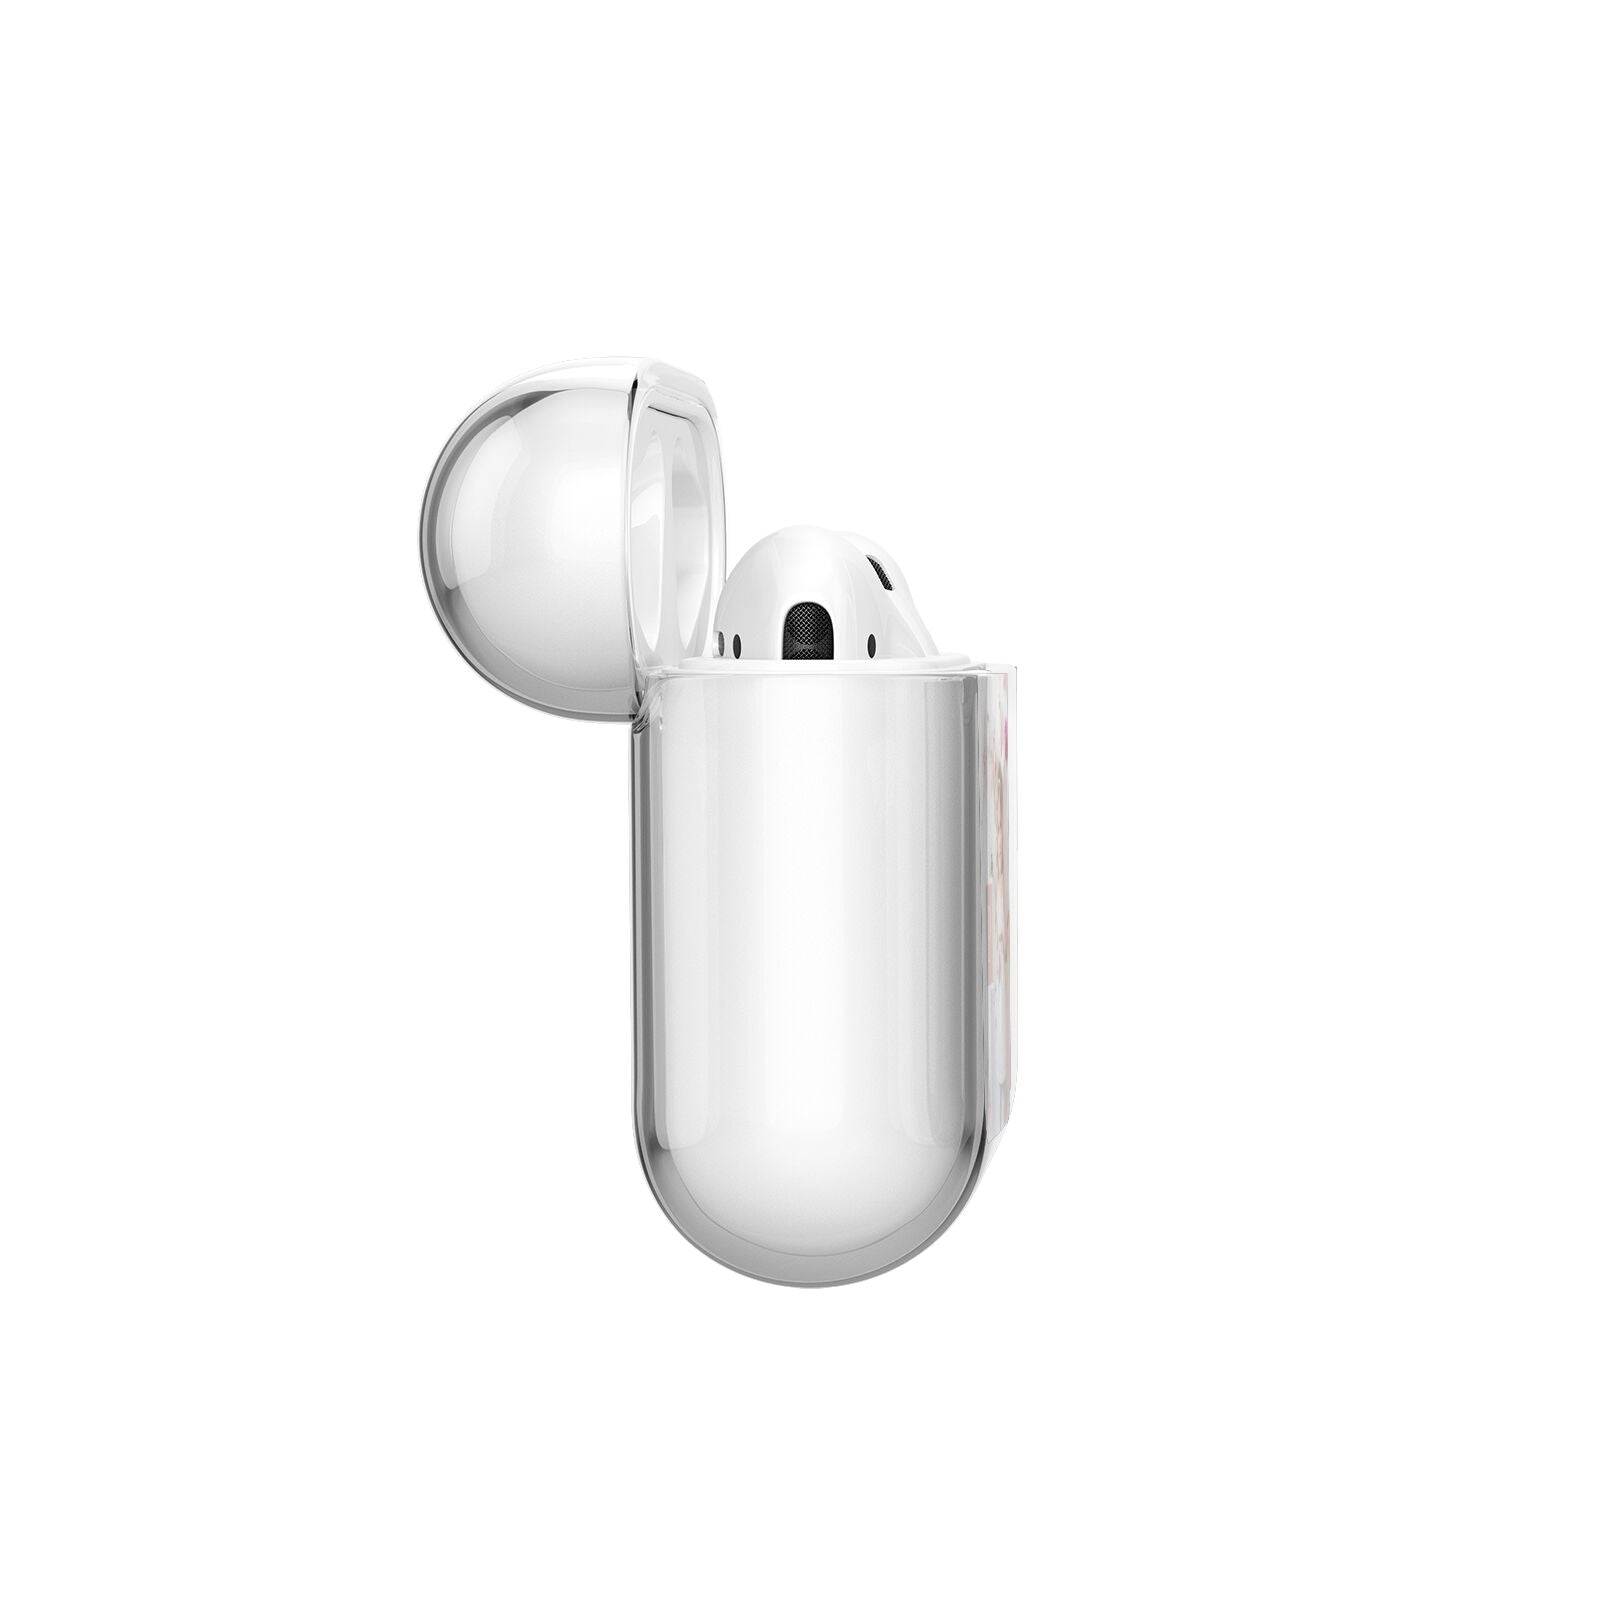 Monogram Marble Photo Upload AirPods Case Side Angle